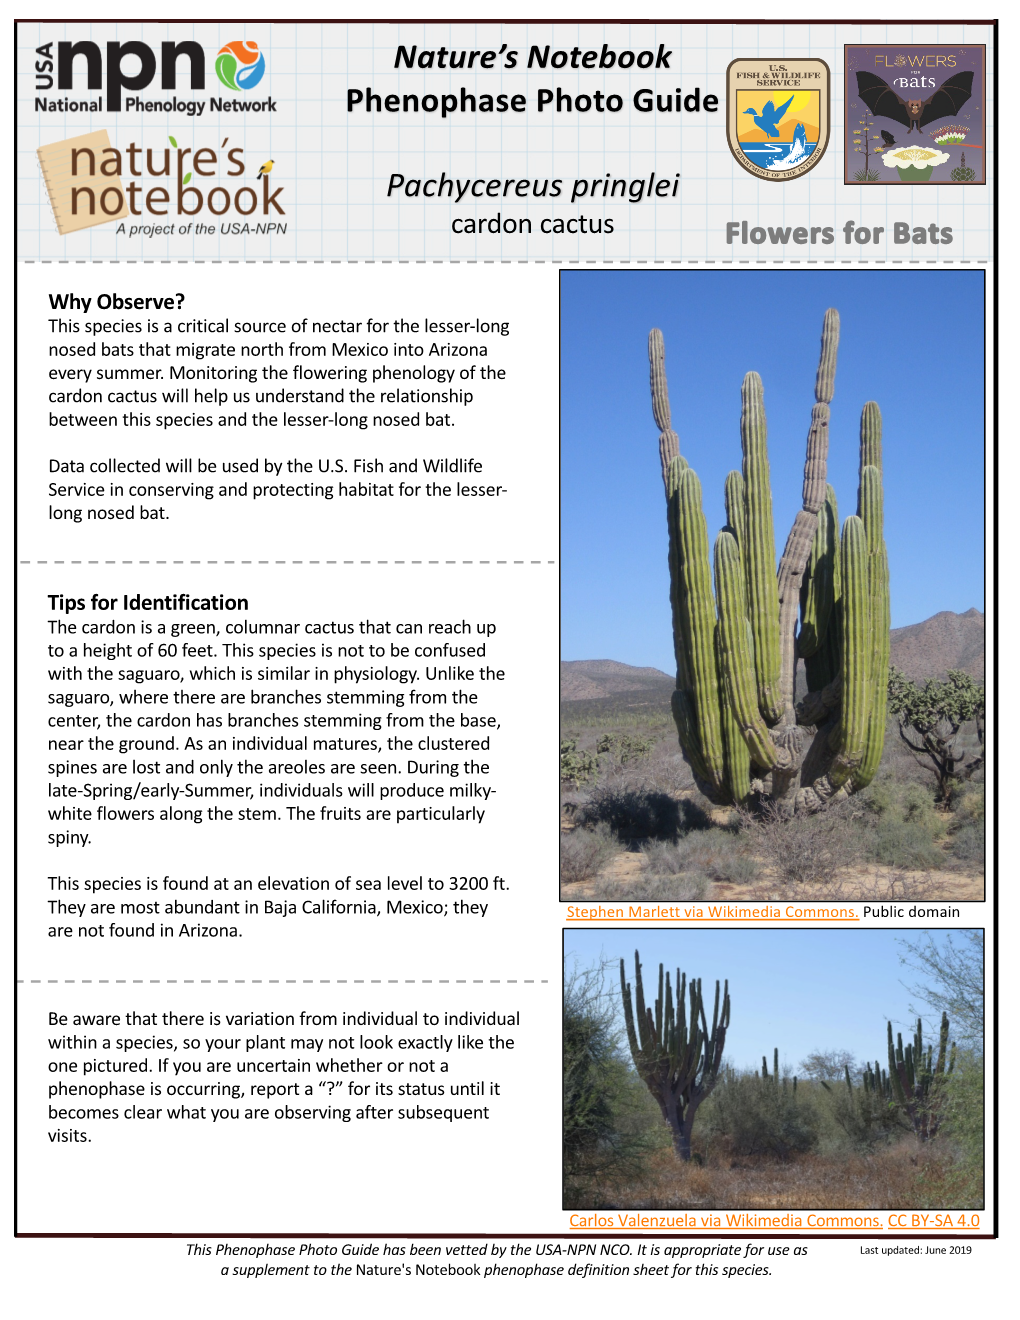 Nature's Notebook Phenophase Photo Guide Pachycereus Pringlei